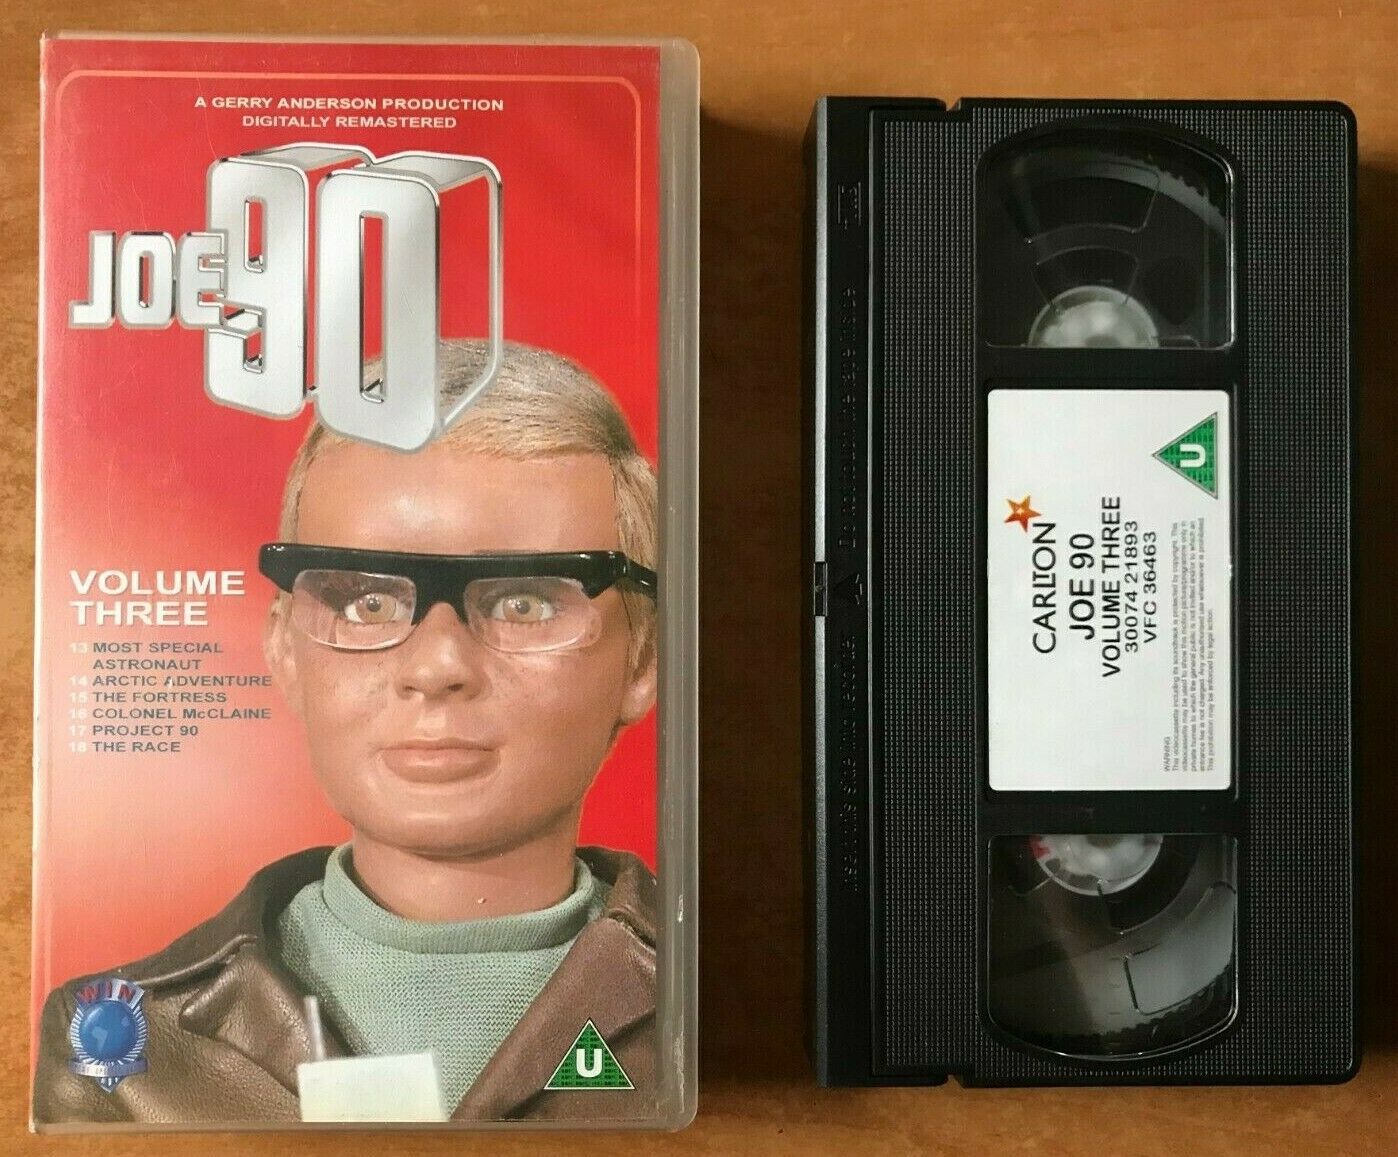 Joe 90 (Vol.3); [Digitally Remastered]: The Fortress - Gerry Anderson - Pal VHS